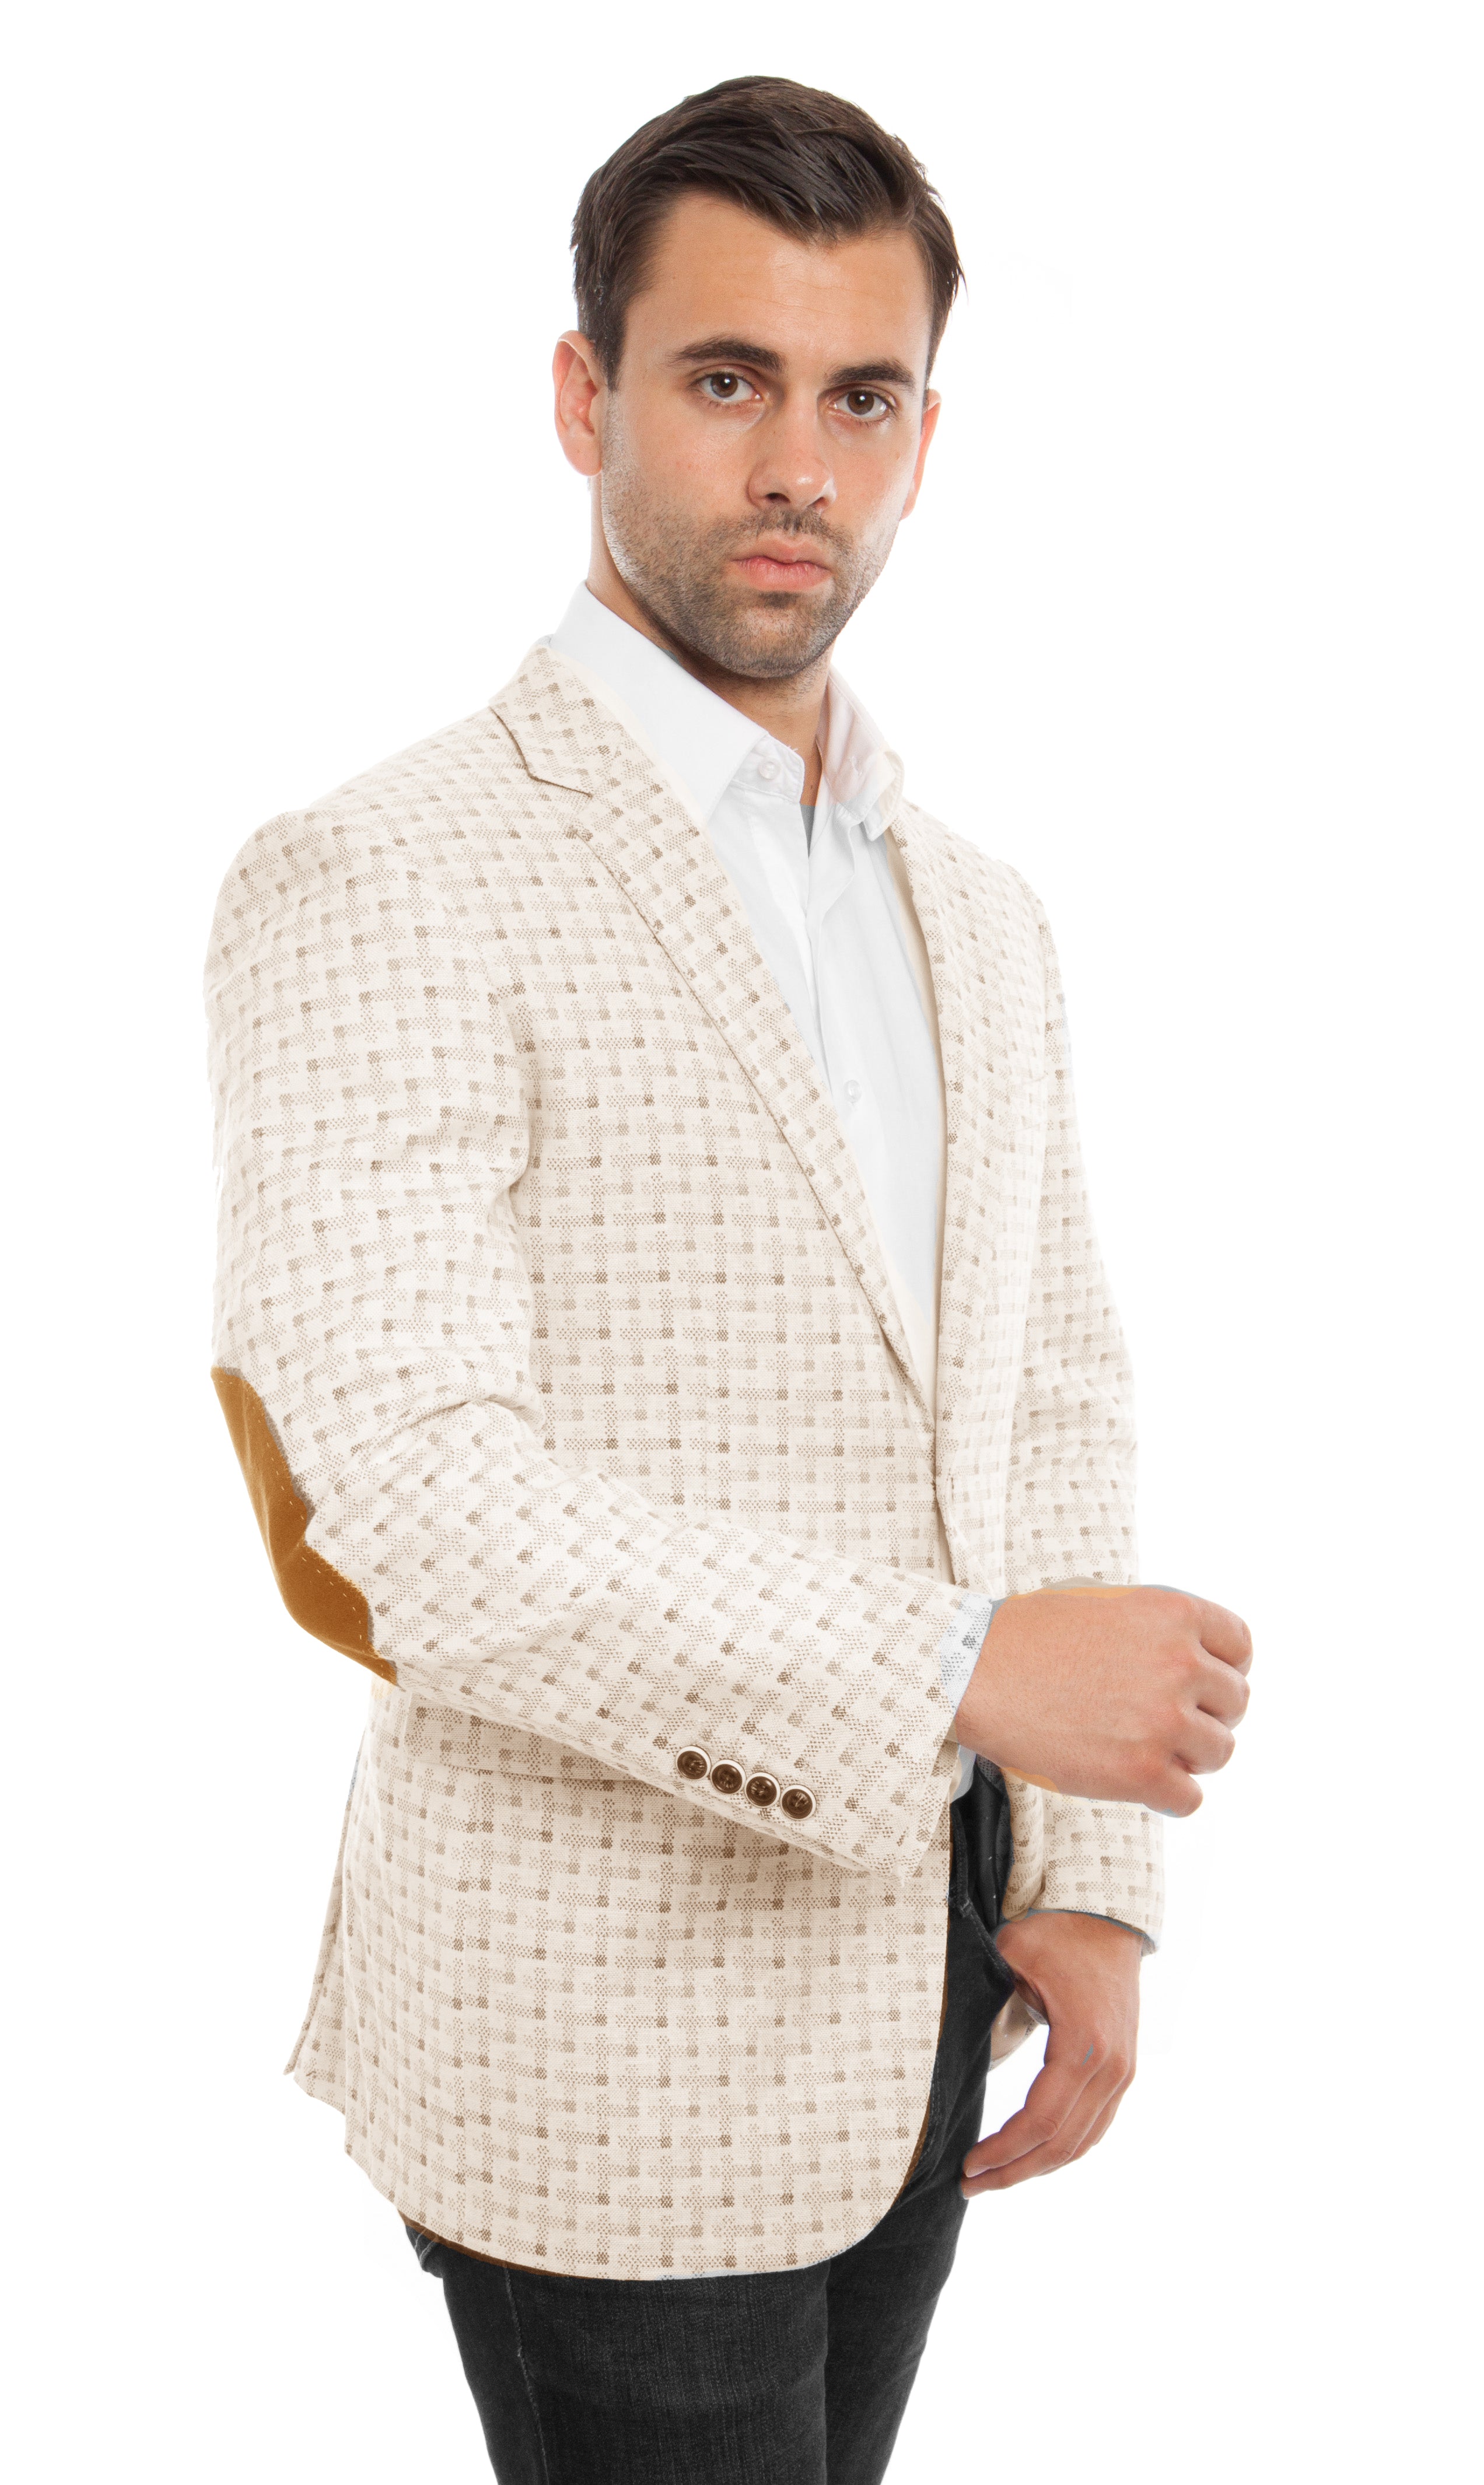 White / Brown Jackets For Men Jacket Suits For All Ocassions MJ213-02